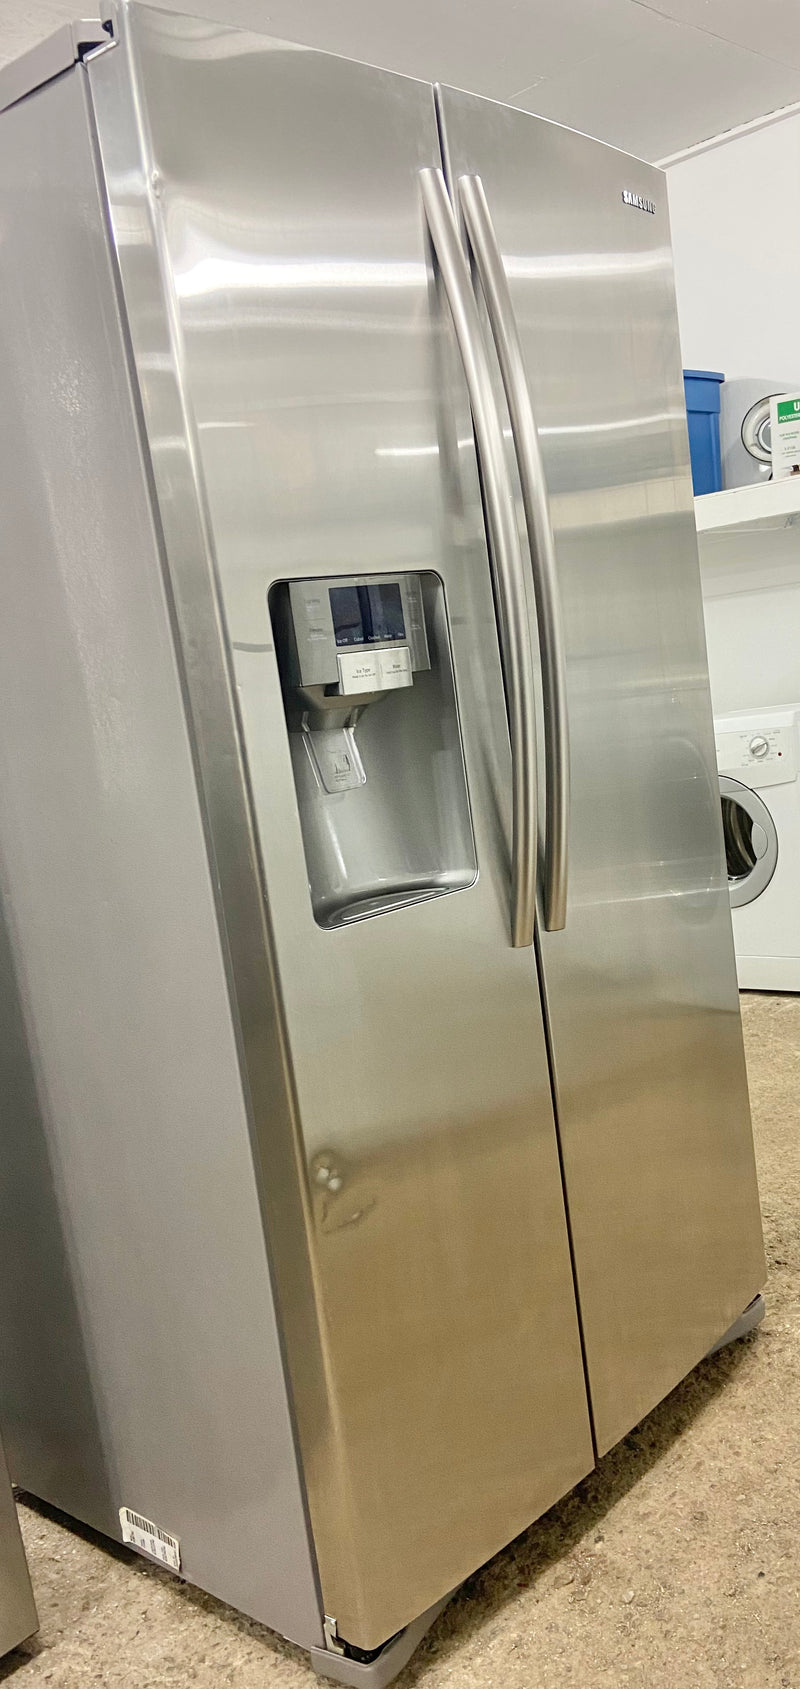 Samsung 36'' Wide Stainless Steel Side by Side Fridge with Water and Ice Maker, Free 60 Day Warranty